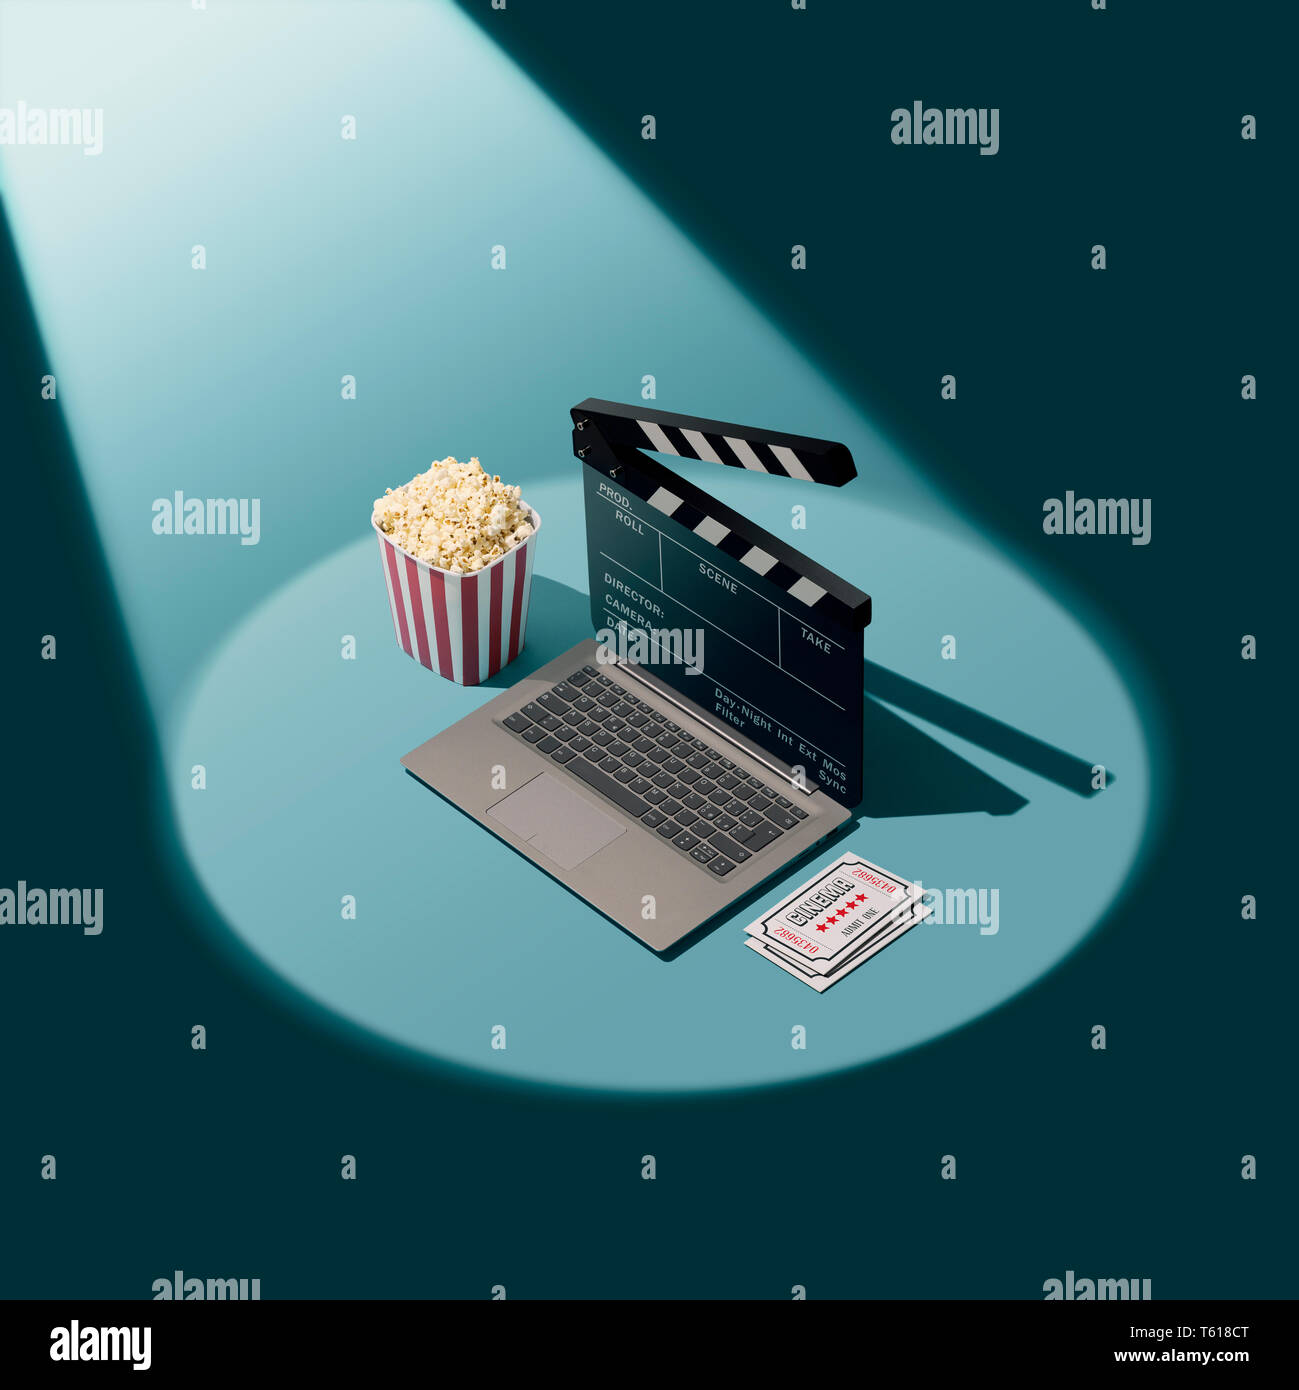 Online movie streaming and cinema: laptop with clapperboard as screen, popcorn and tickets in the spotlight Stock Photo